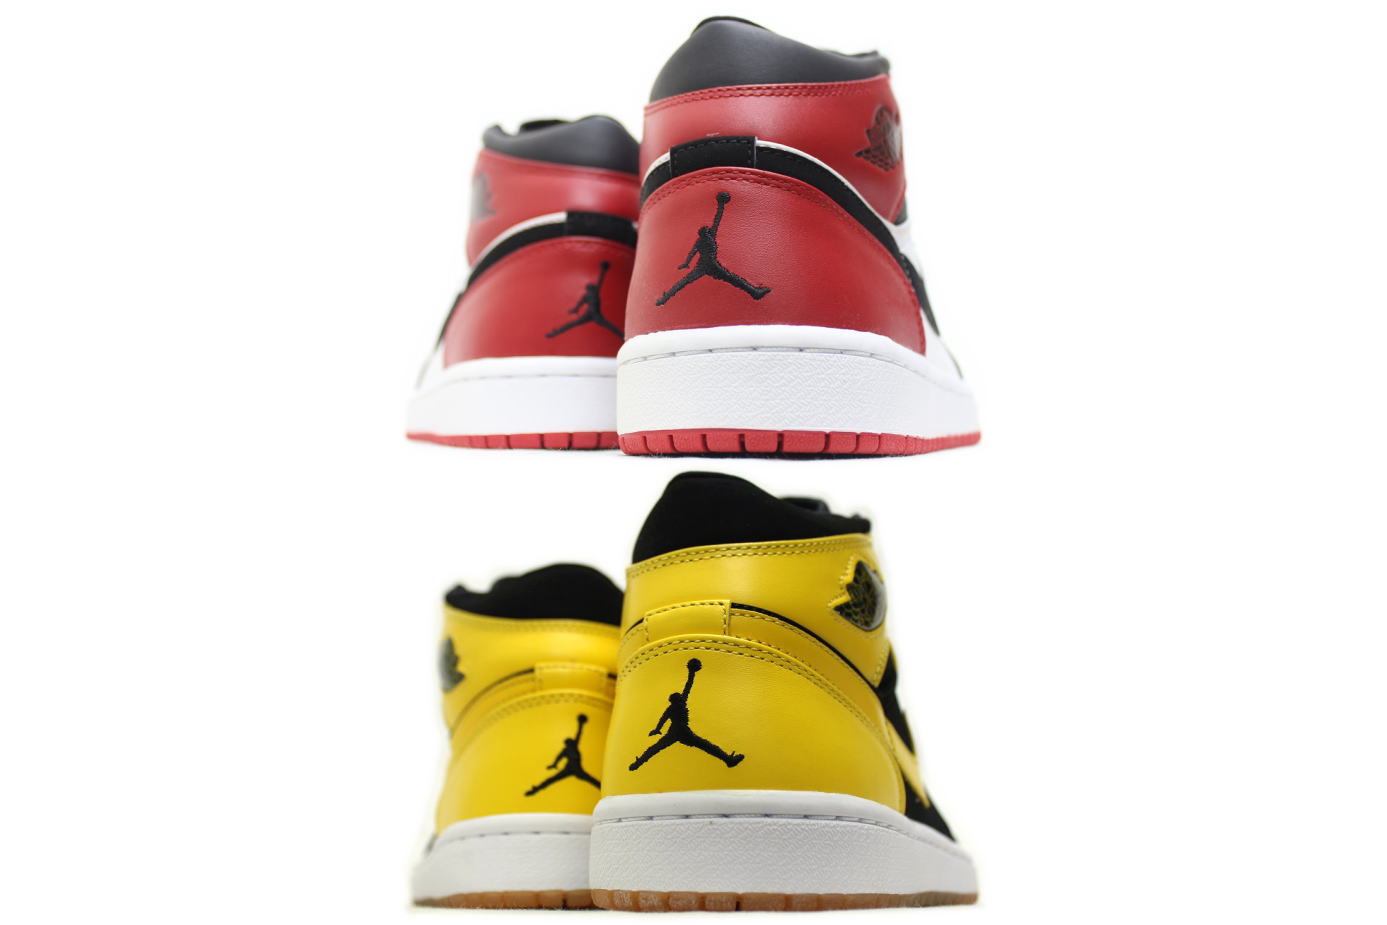 NIKE JORDAN OLD LOVE NEW LOVE BMP PACK two-legged set 316132-991 Nike Air  Jordan 1 retro old love new love beginning moments Pack stumbled black  yellow ...